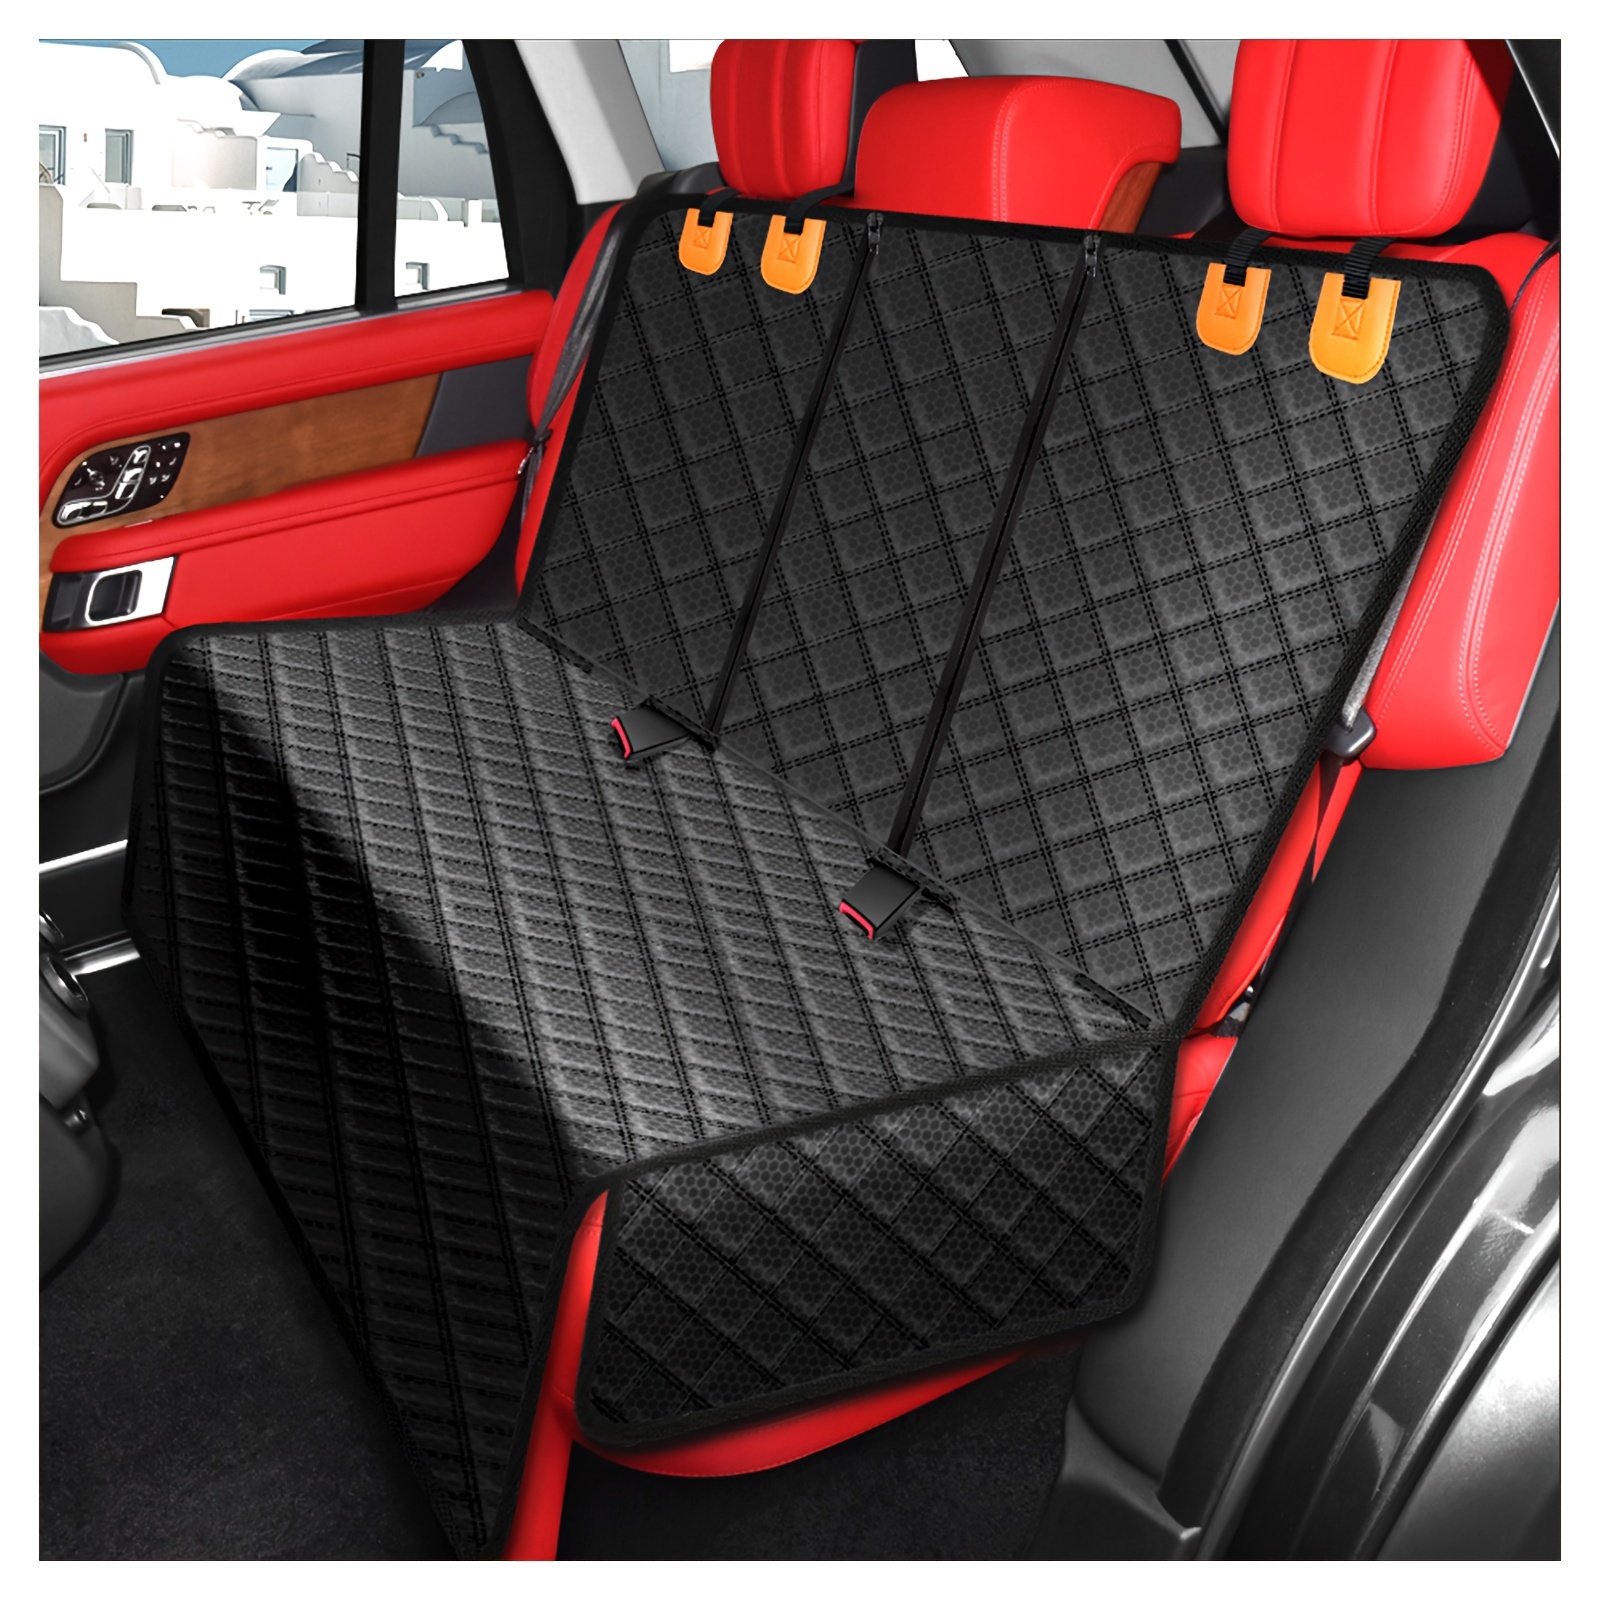 

Durable Car Back Seat Protector, 100% Waterproof Durable Scratch-proof Non-slip Back Seat Protector, Universal Size For Cars/trucks/suvs